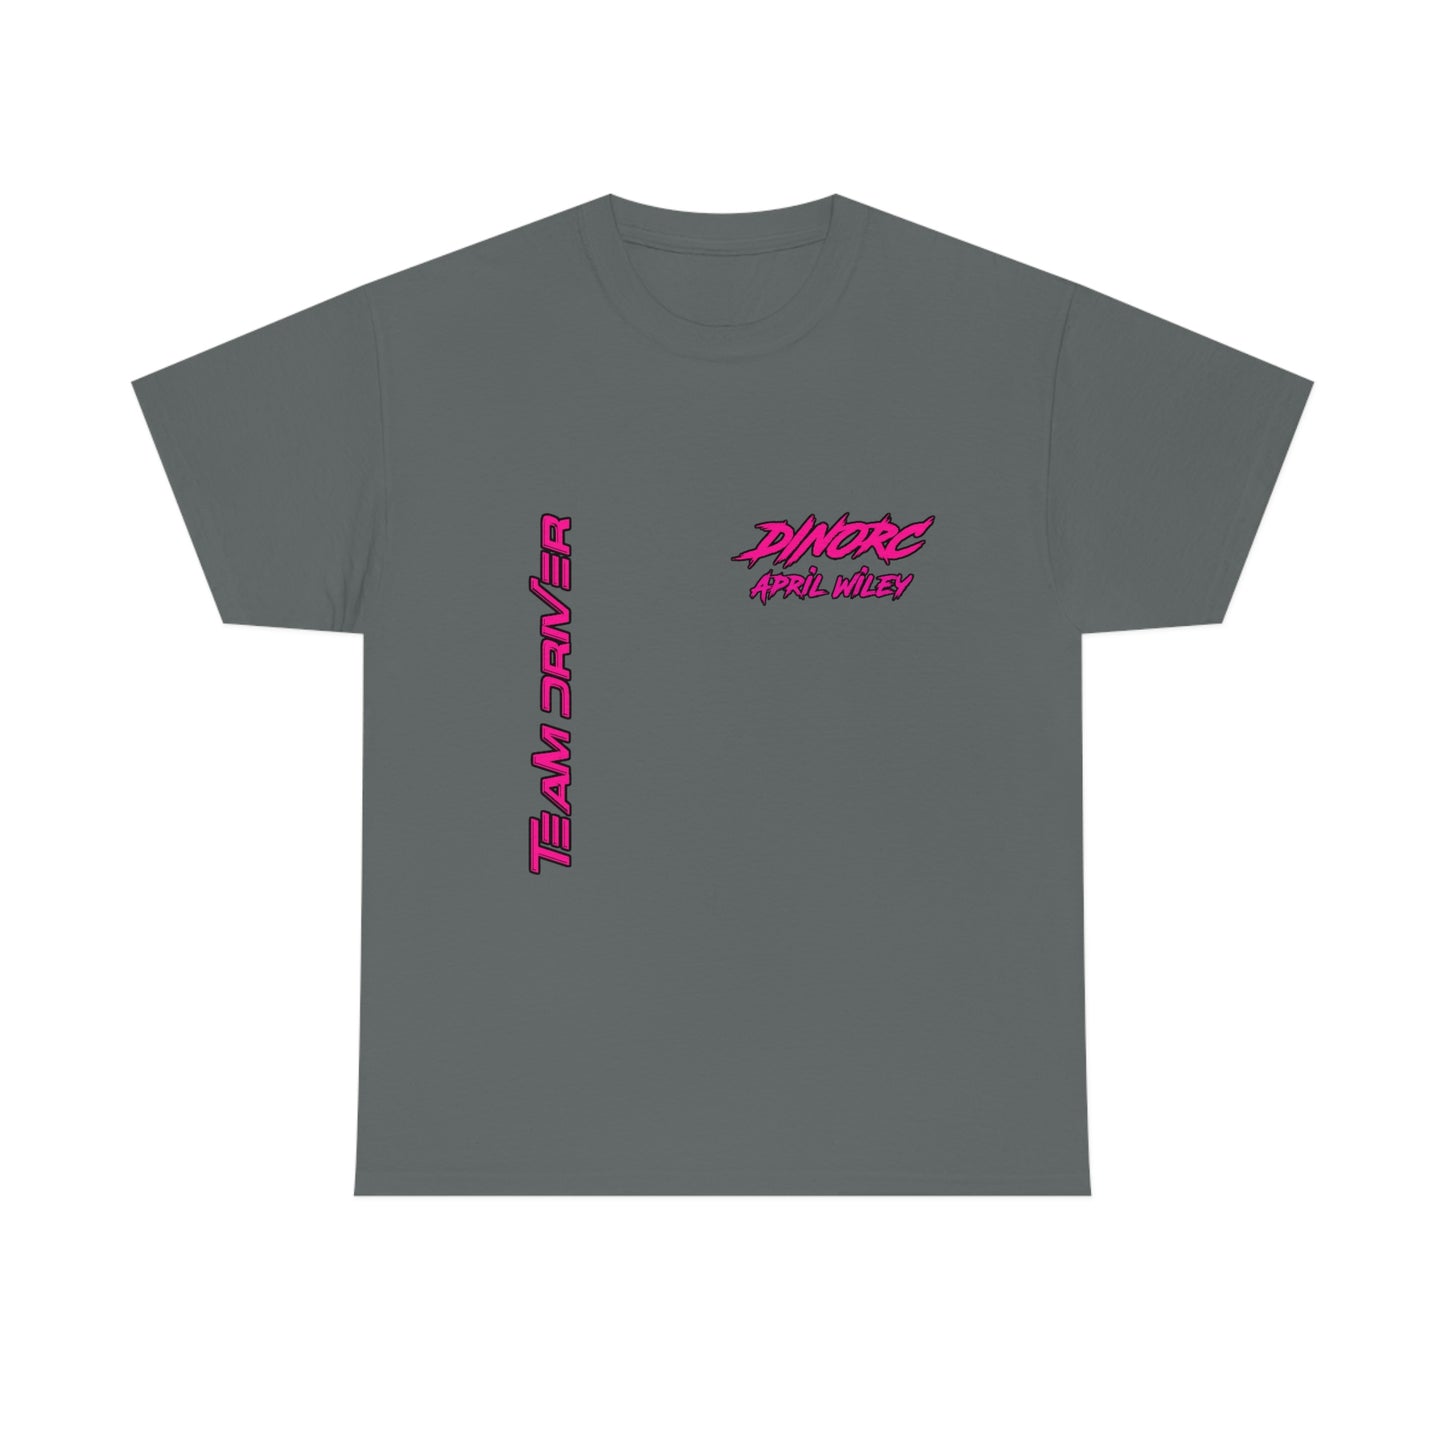 Vertical Team Driver April Wiley Dino's Divas Front and Back DinoRc Logo T-Shirt S-5x 5 colors